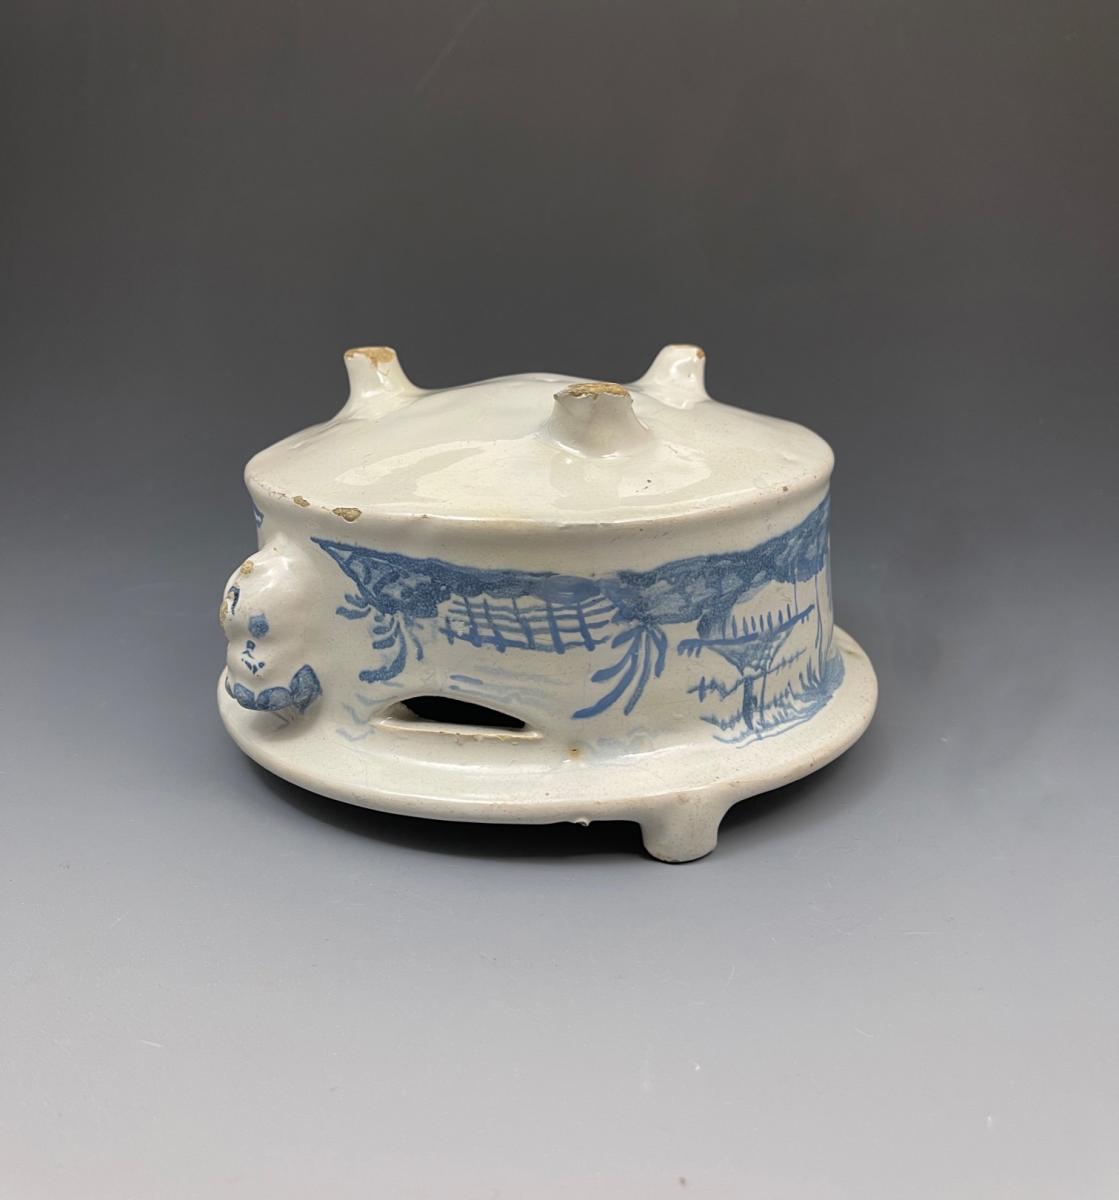 Delftware pottery blue and white food or plate warmer dated 1787